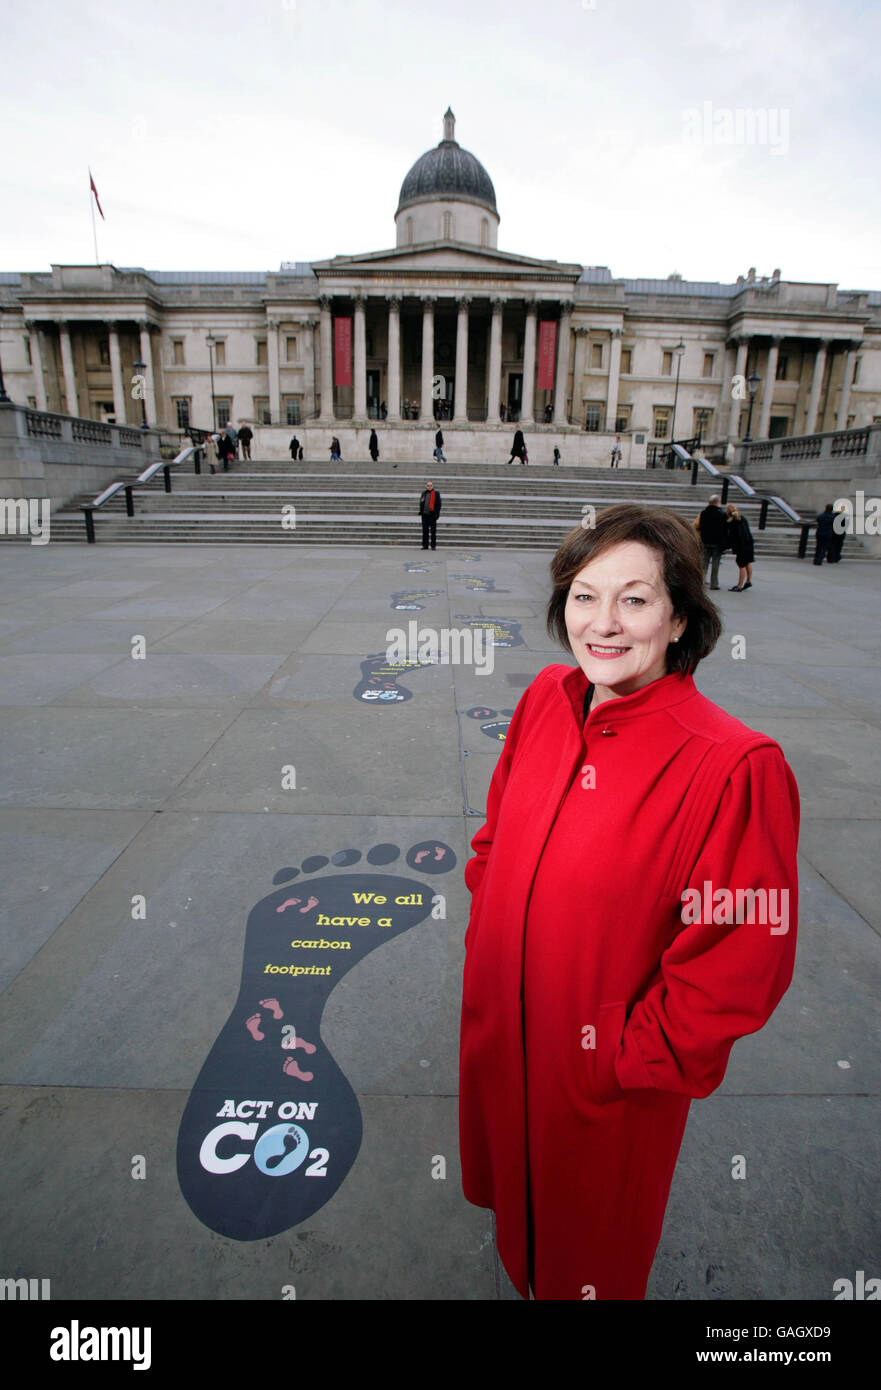 Minister for Climate Change, Joan Ruddock MP, spearheads the Government's Act on CO2 campaign with a series of giant footprints in Trafalgar Square, London. Stock Photo